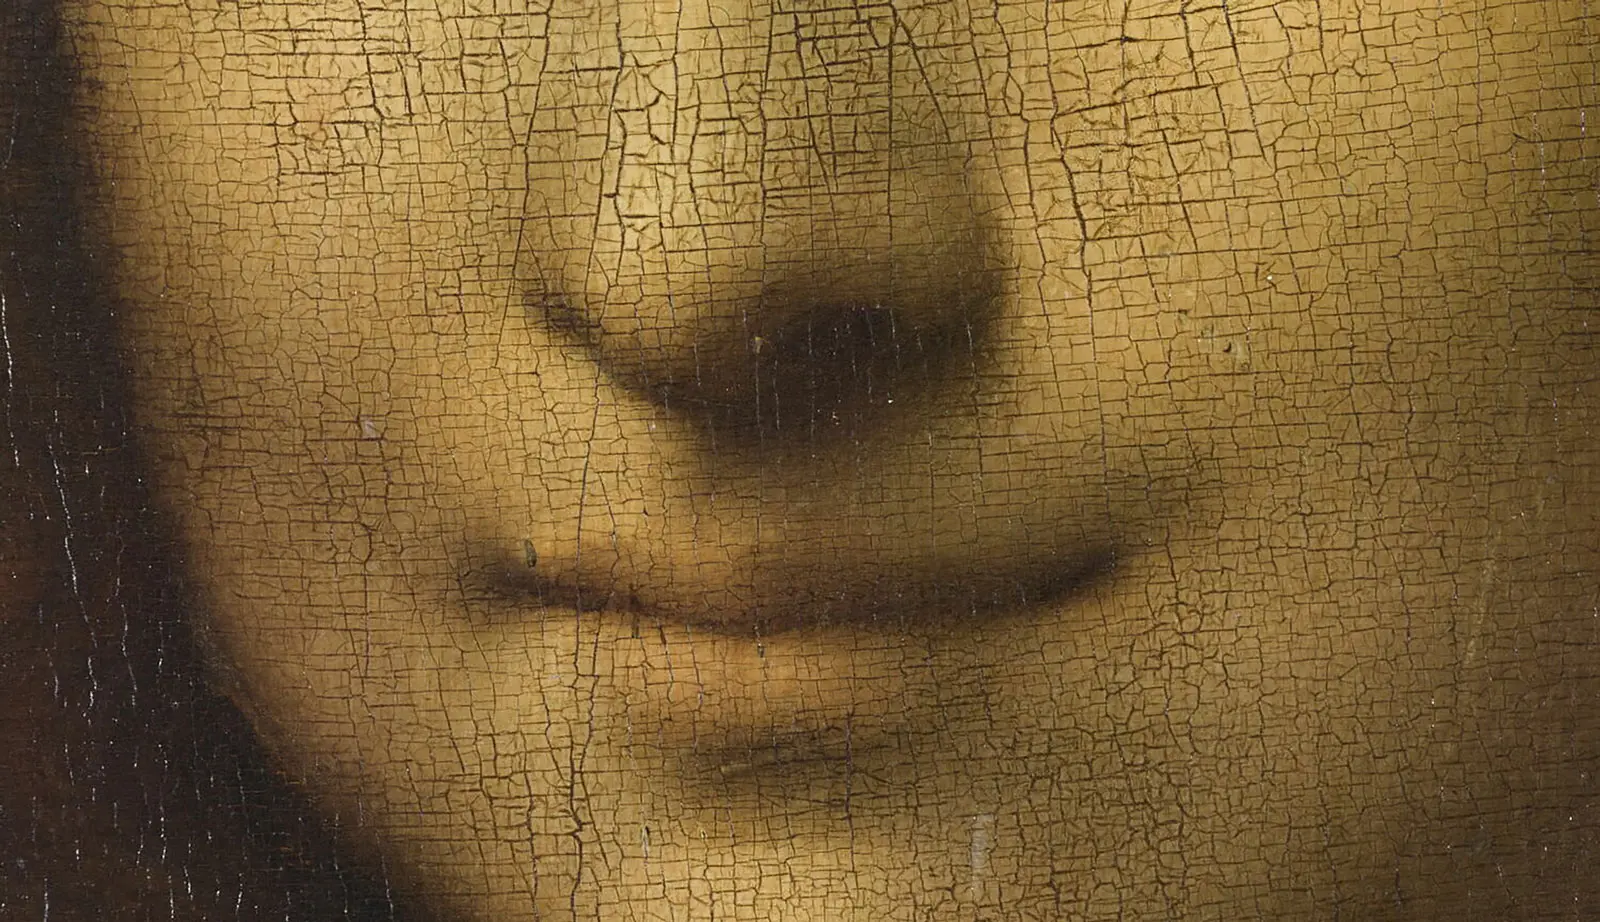 Meaning of Mona Lisa's smile